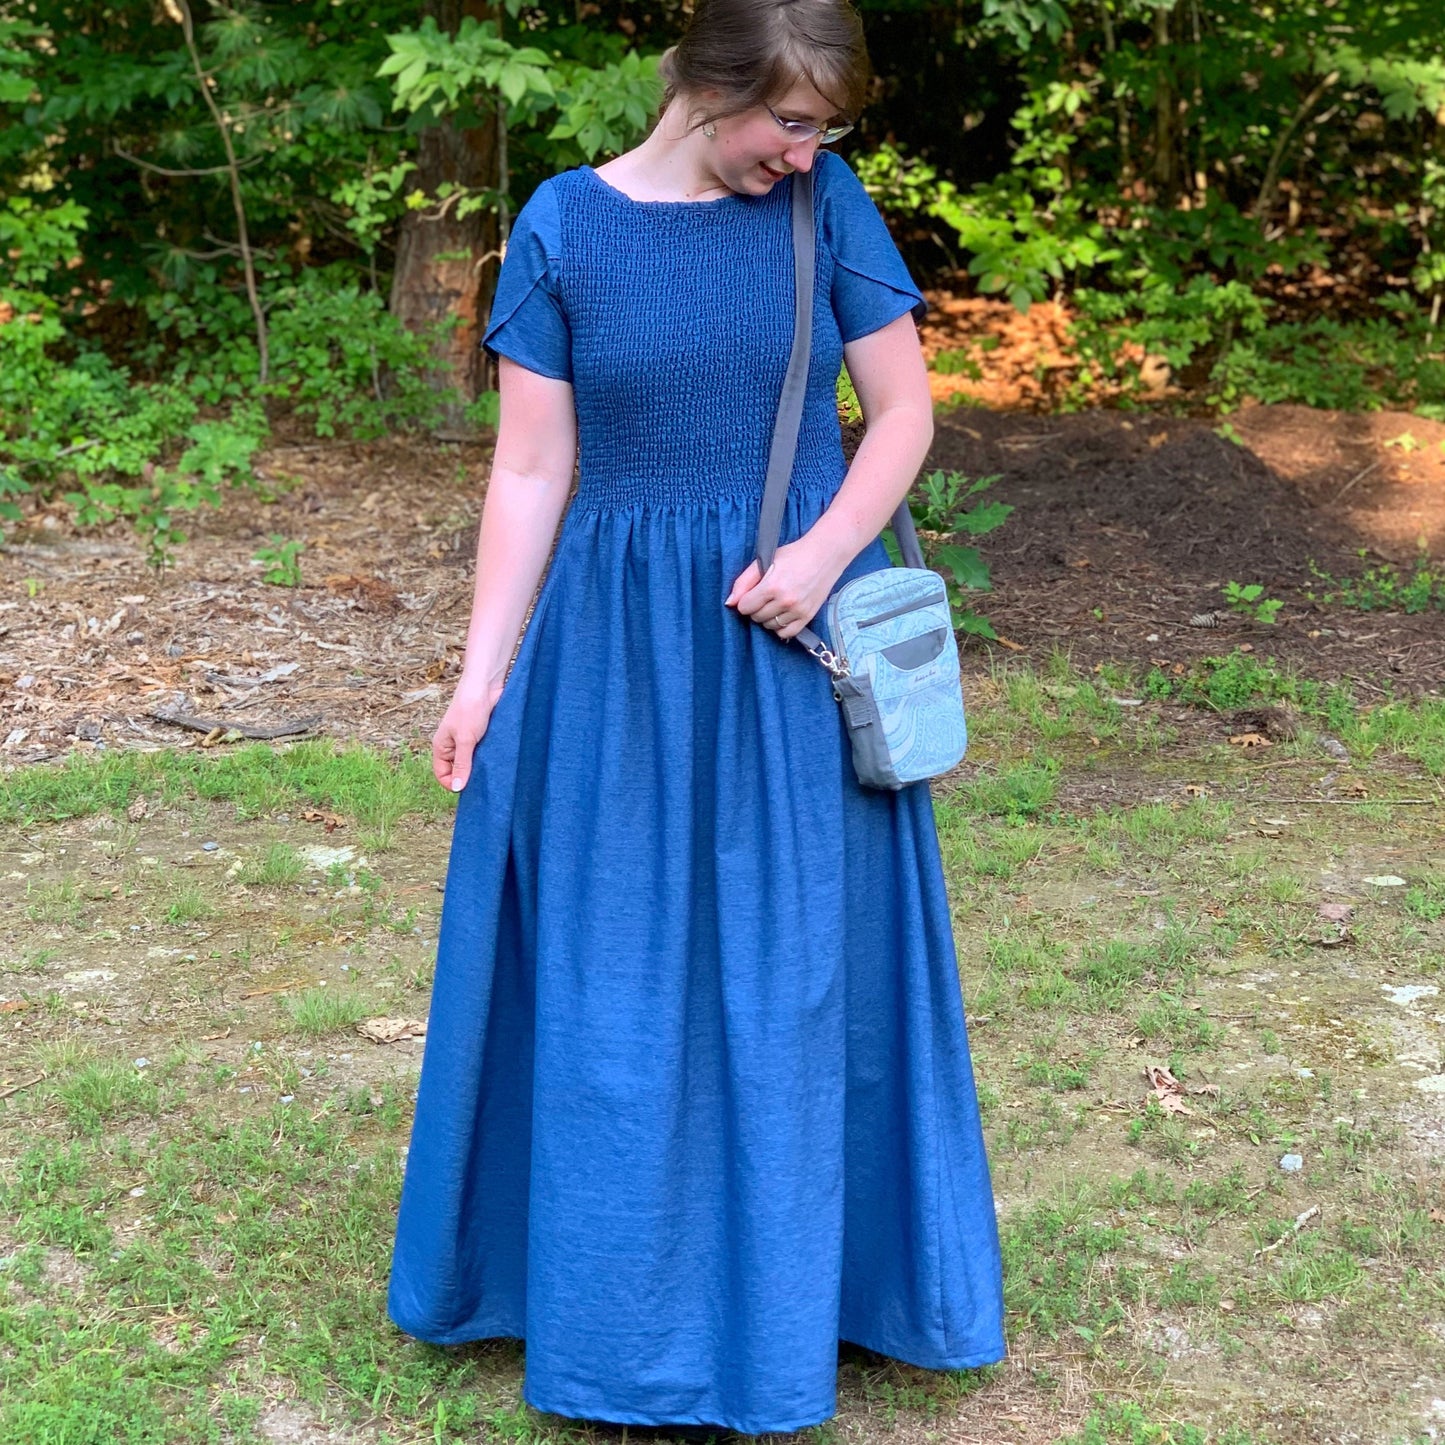 Modest denim maxi dress with smocking at the top and petal style sleeves